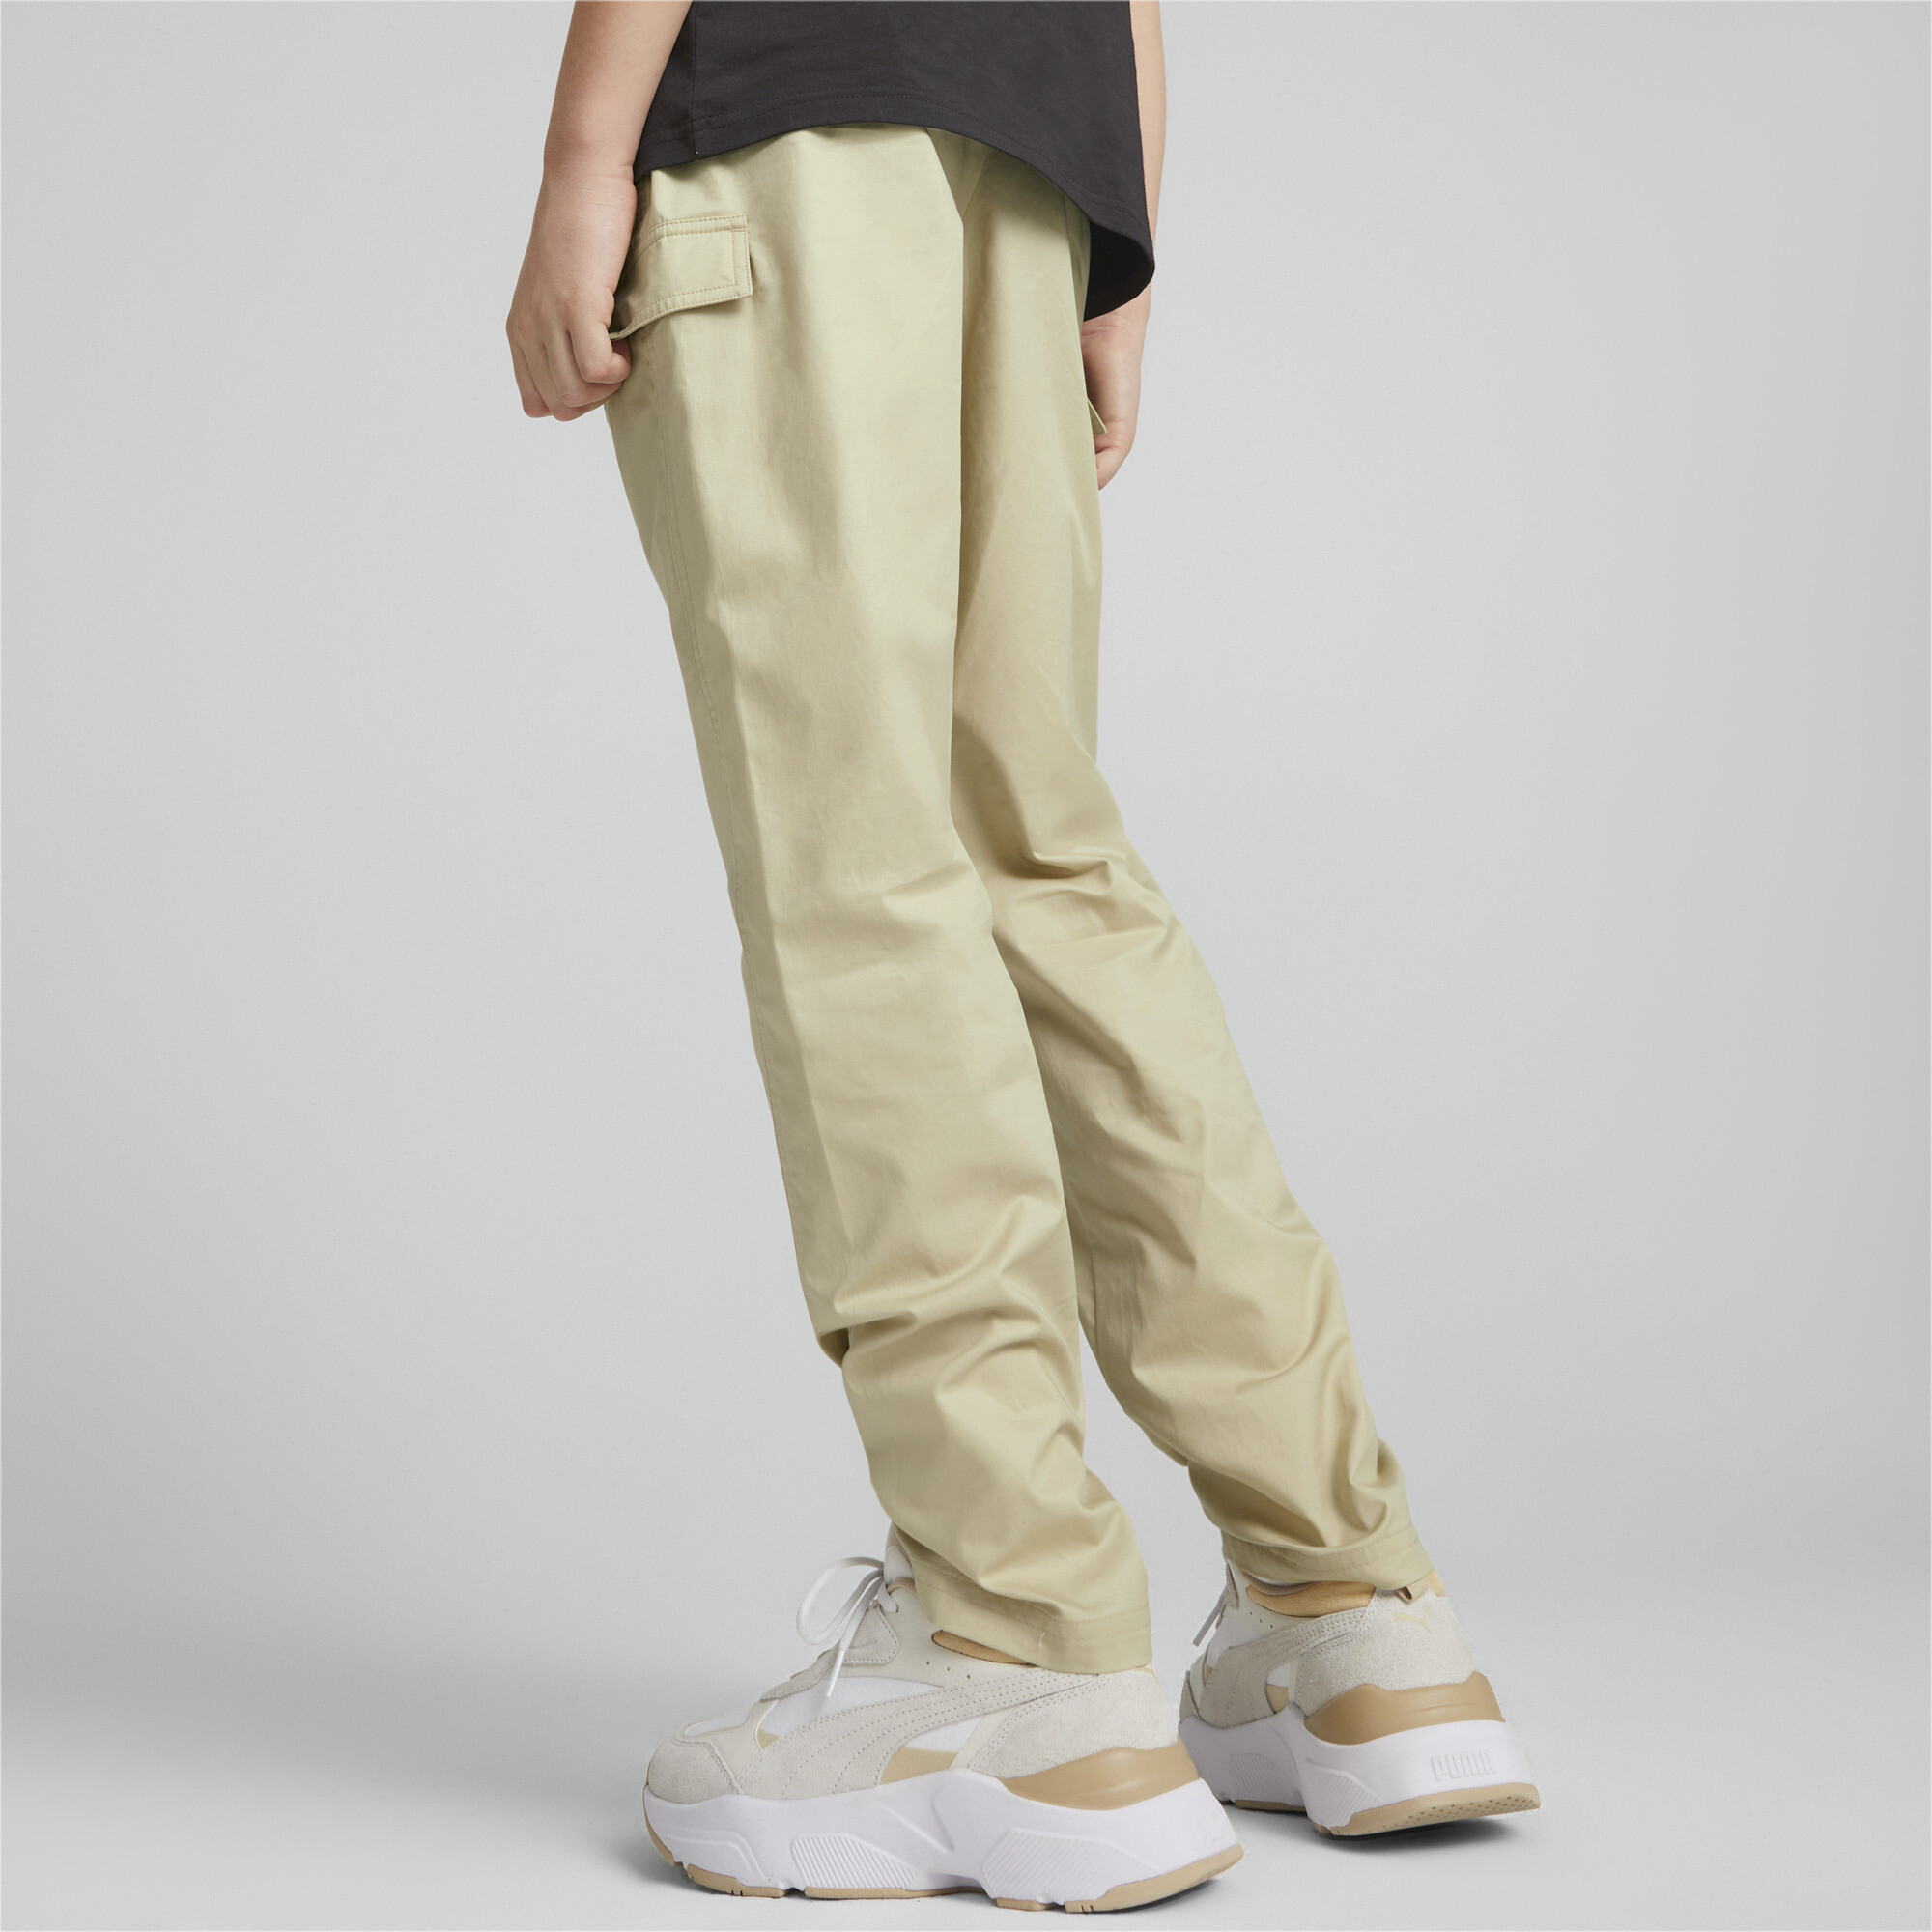 Puma Classics Woven Sweatpants Youth, Beige, Size 15-16Y, Clothing